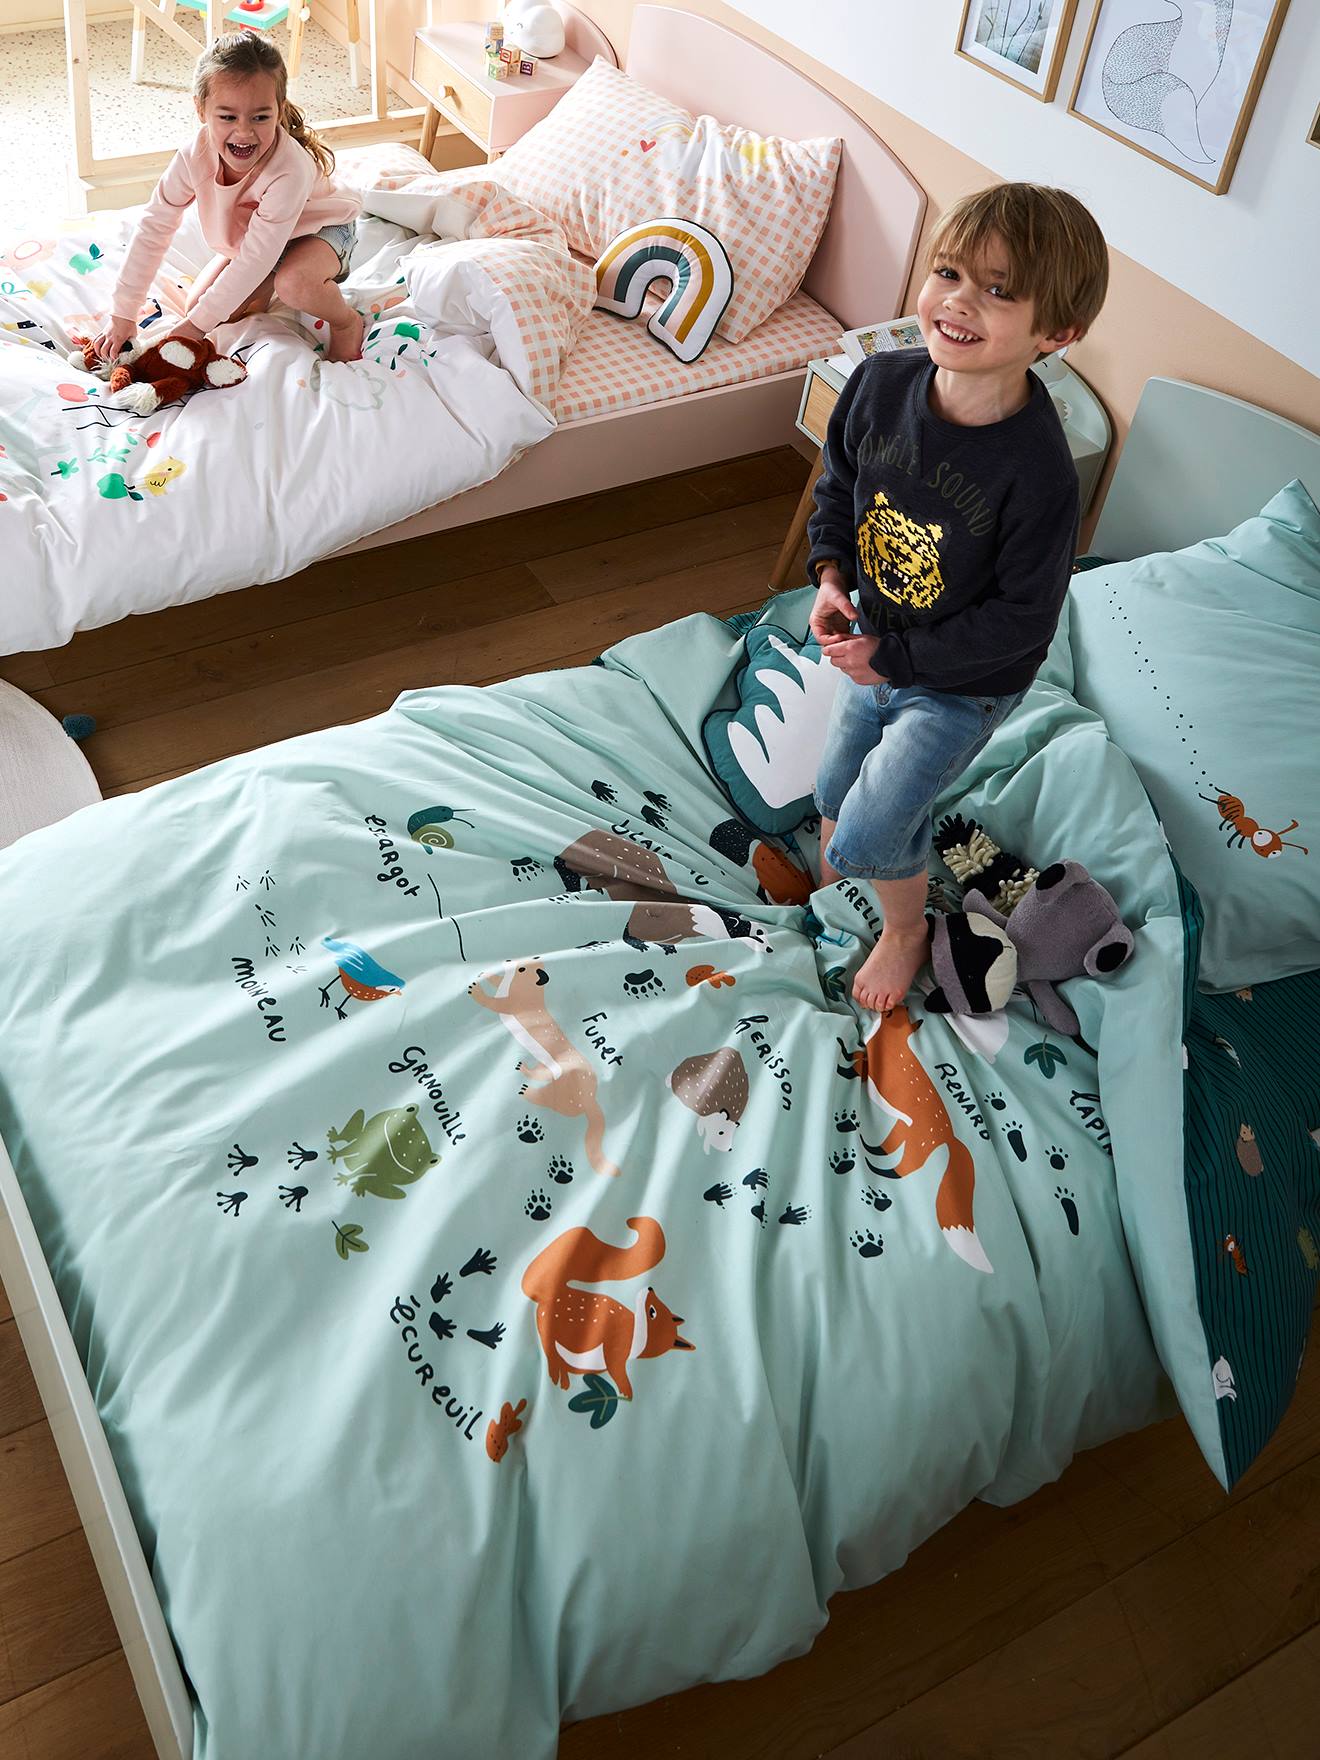 Organic Bed Protector For Kids